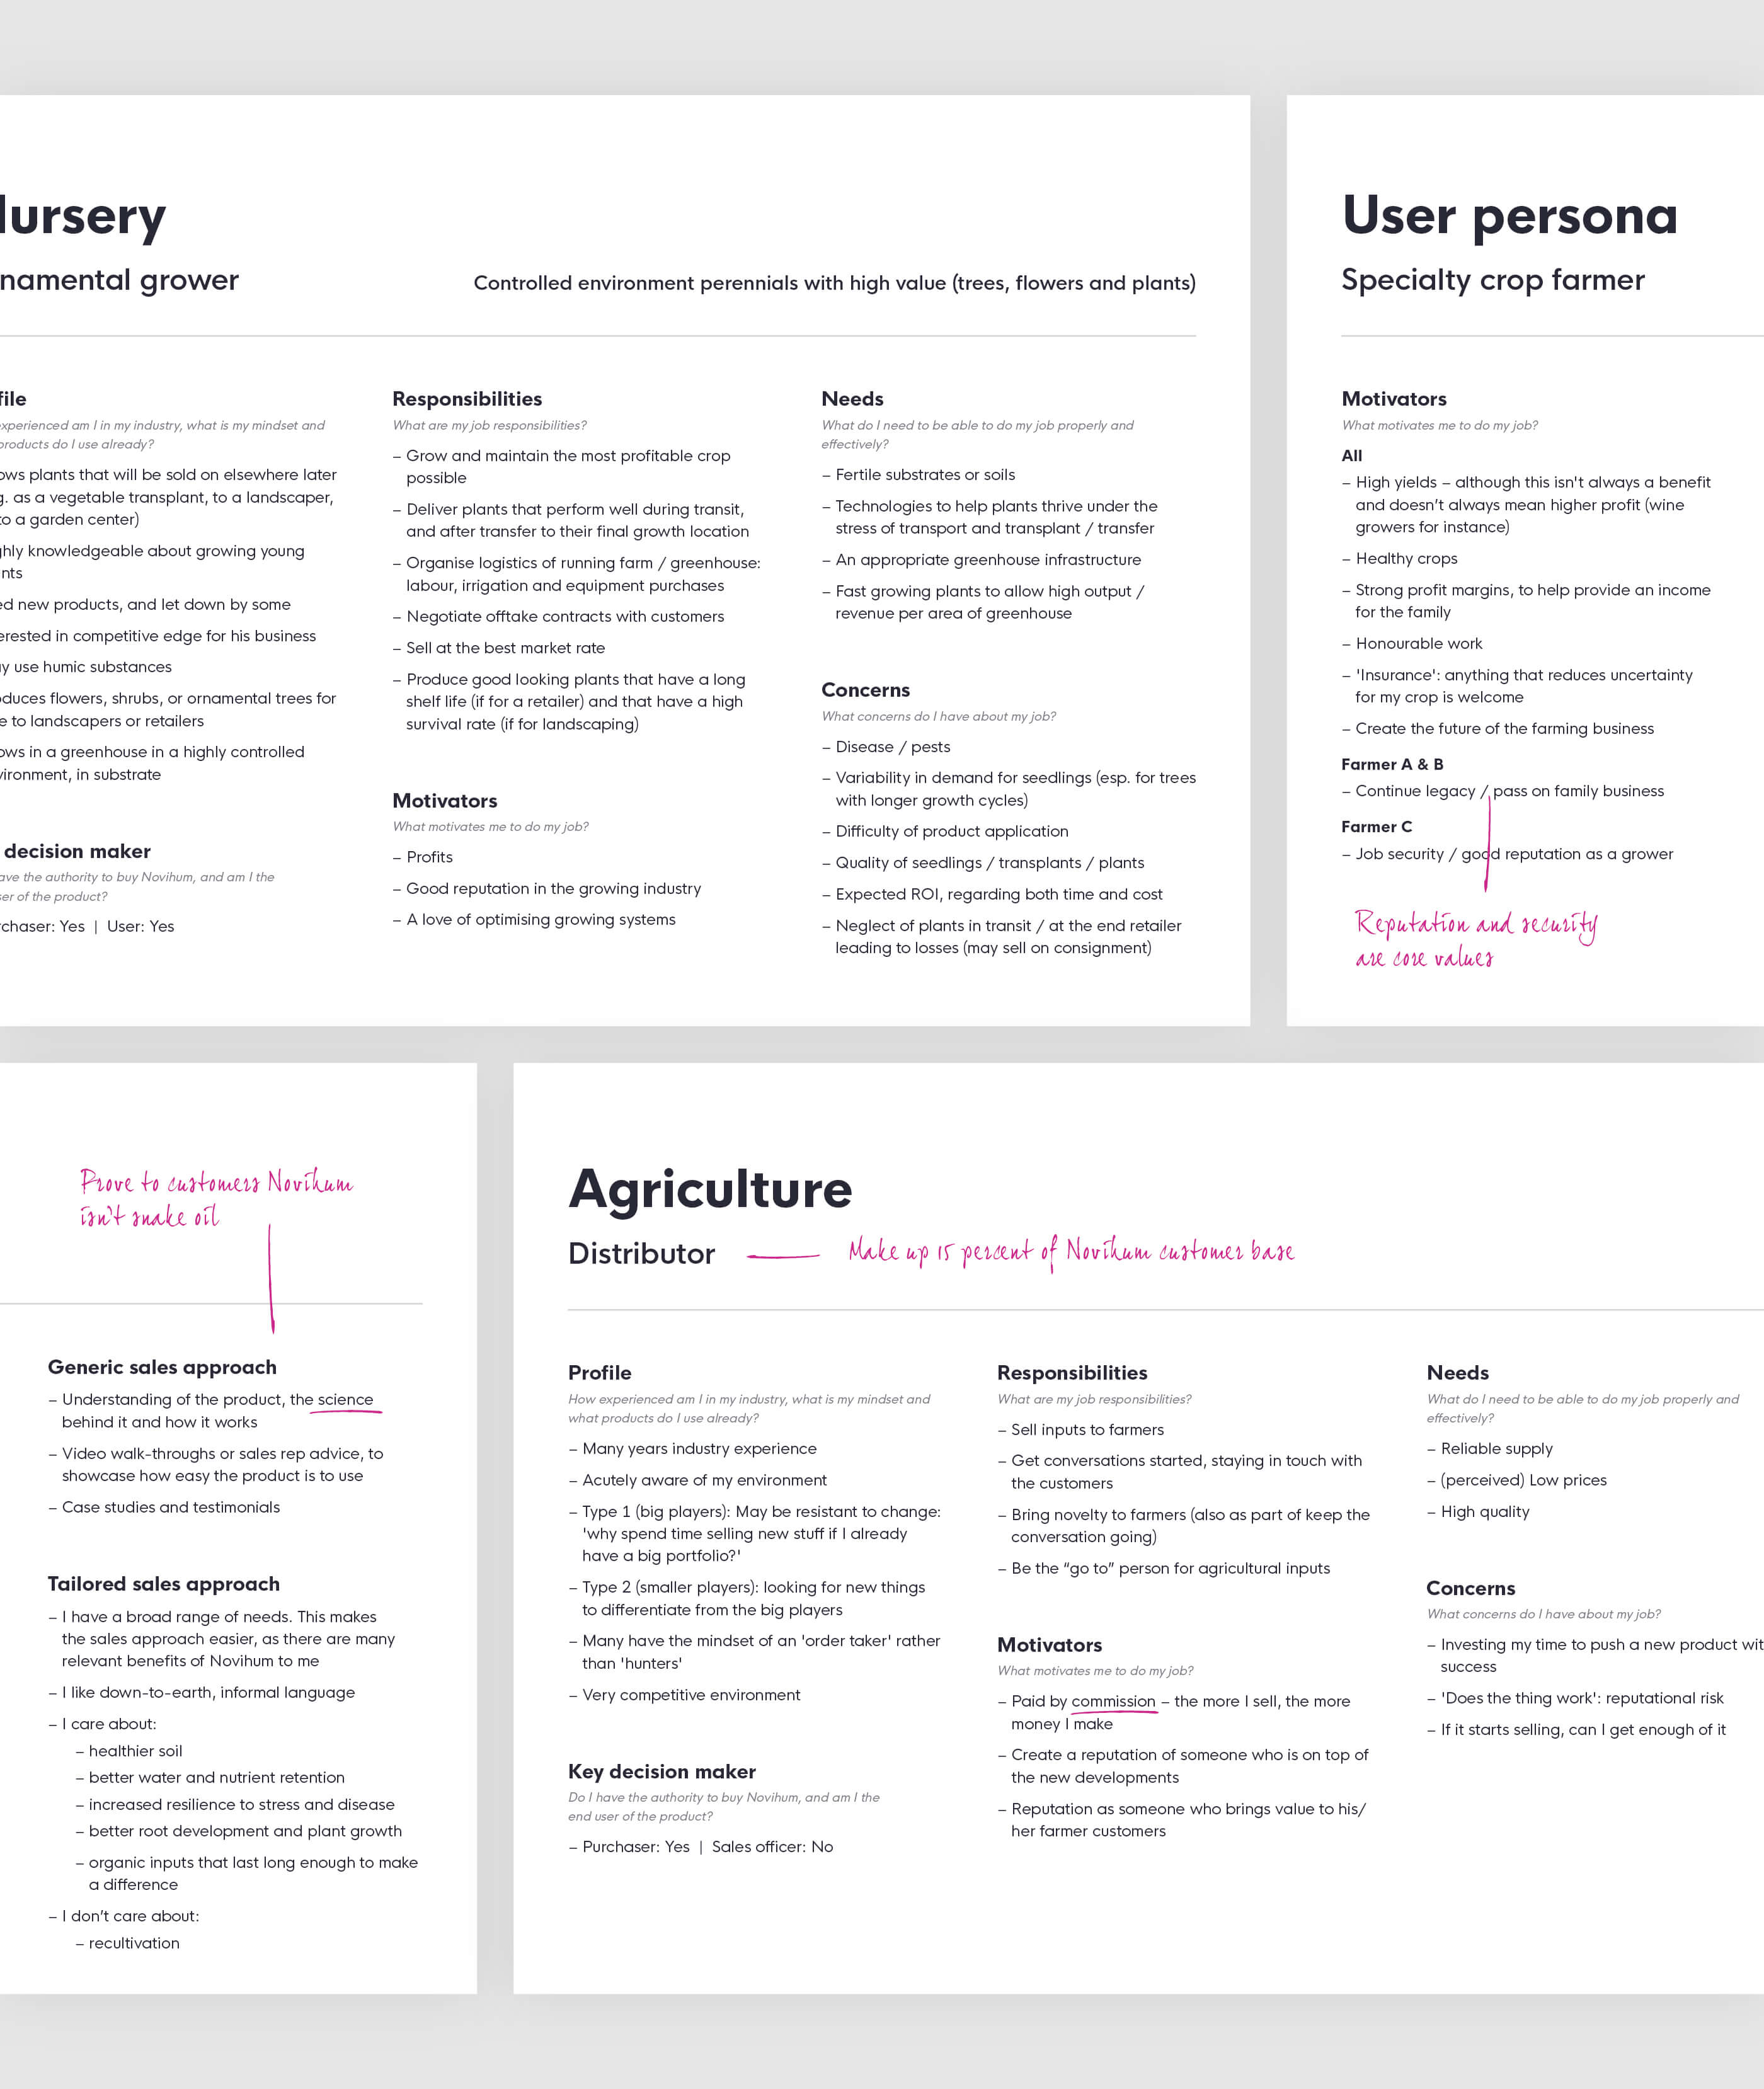 Notes and hand-written annotations, detailing user personas for an ornamental grower, specialty crop farmer and agricultural distributor